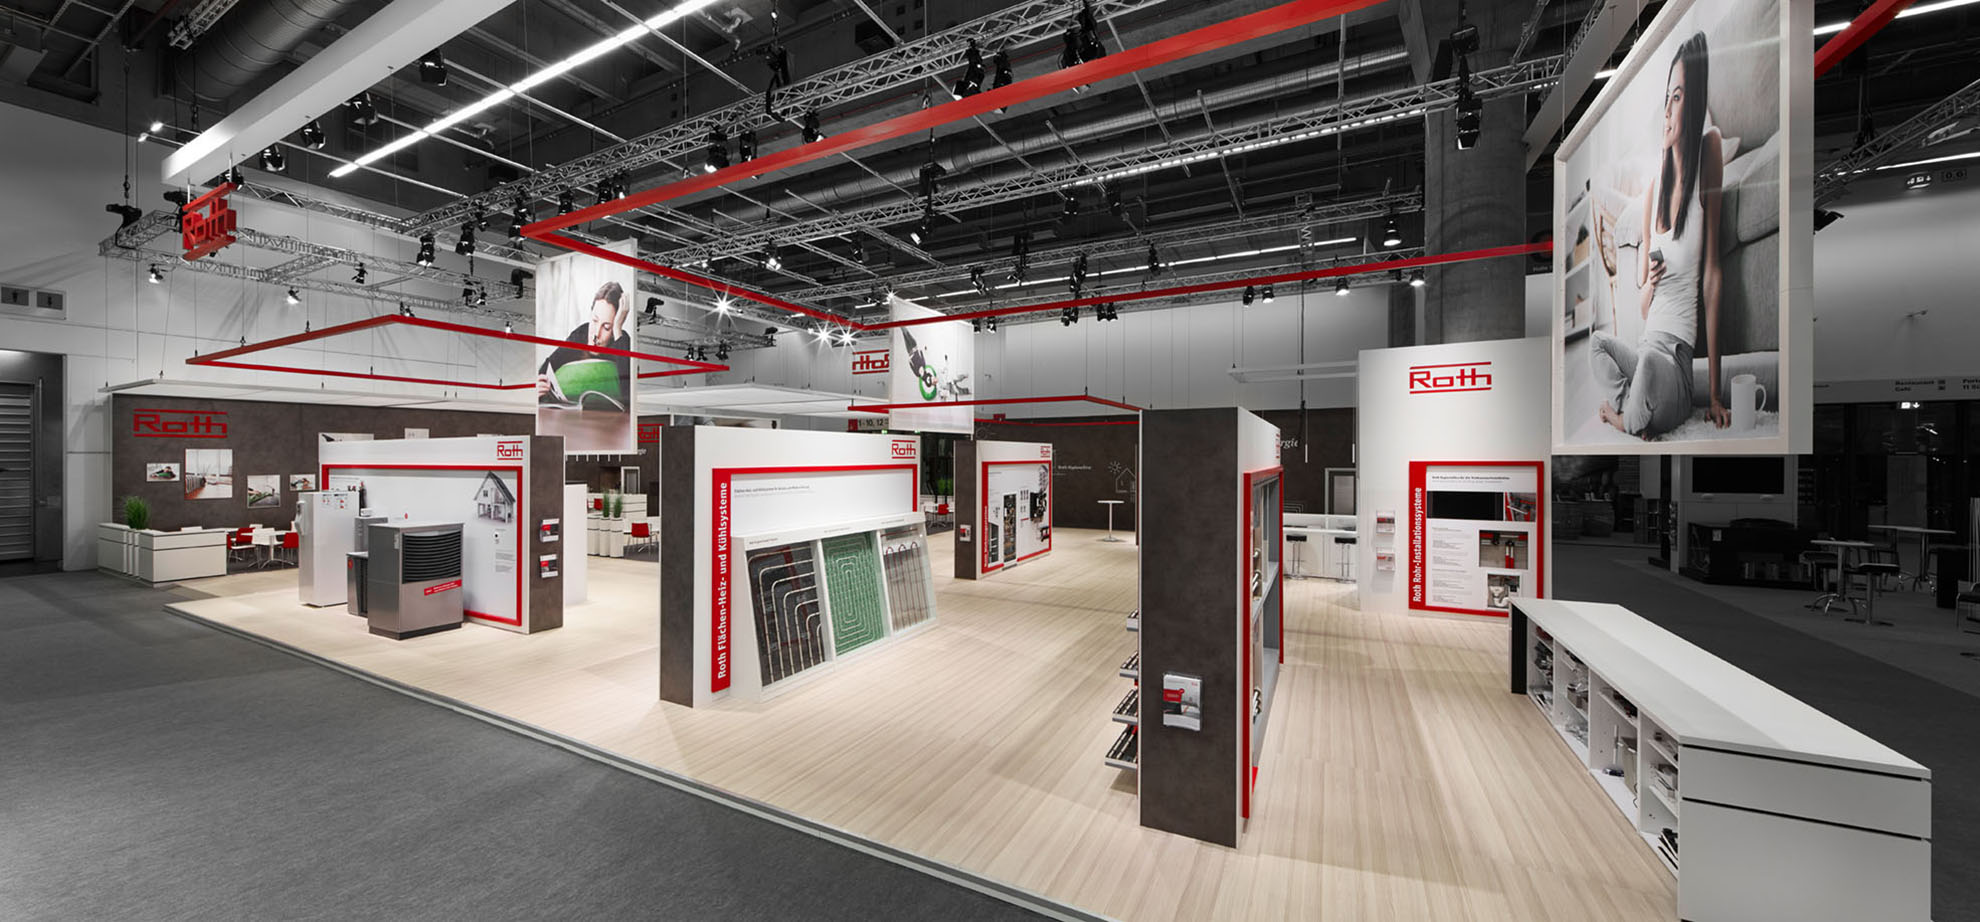 Exhibition Stand Builder Display International offers Stand Building and Stand Design as a general contractor at the ISH in Frankfurt